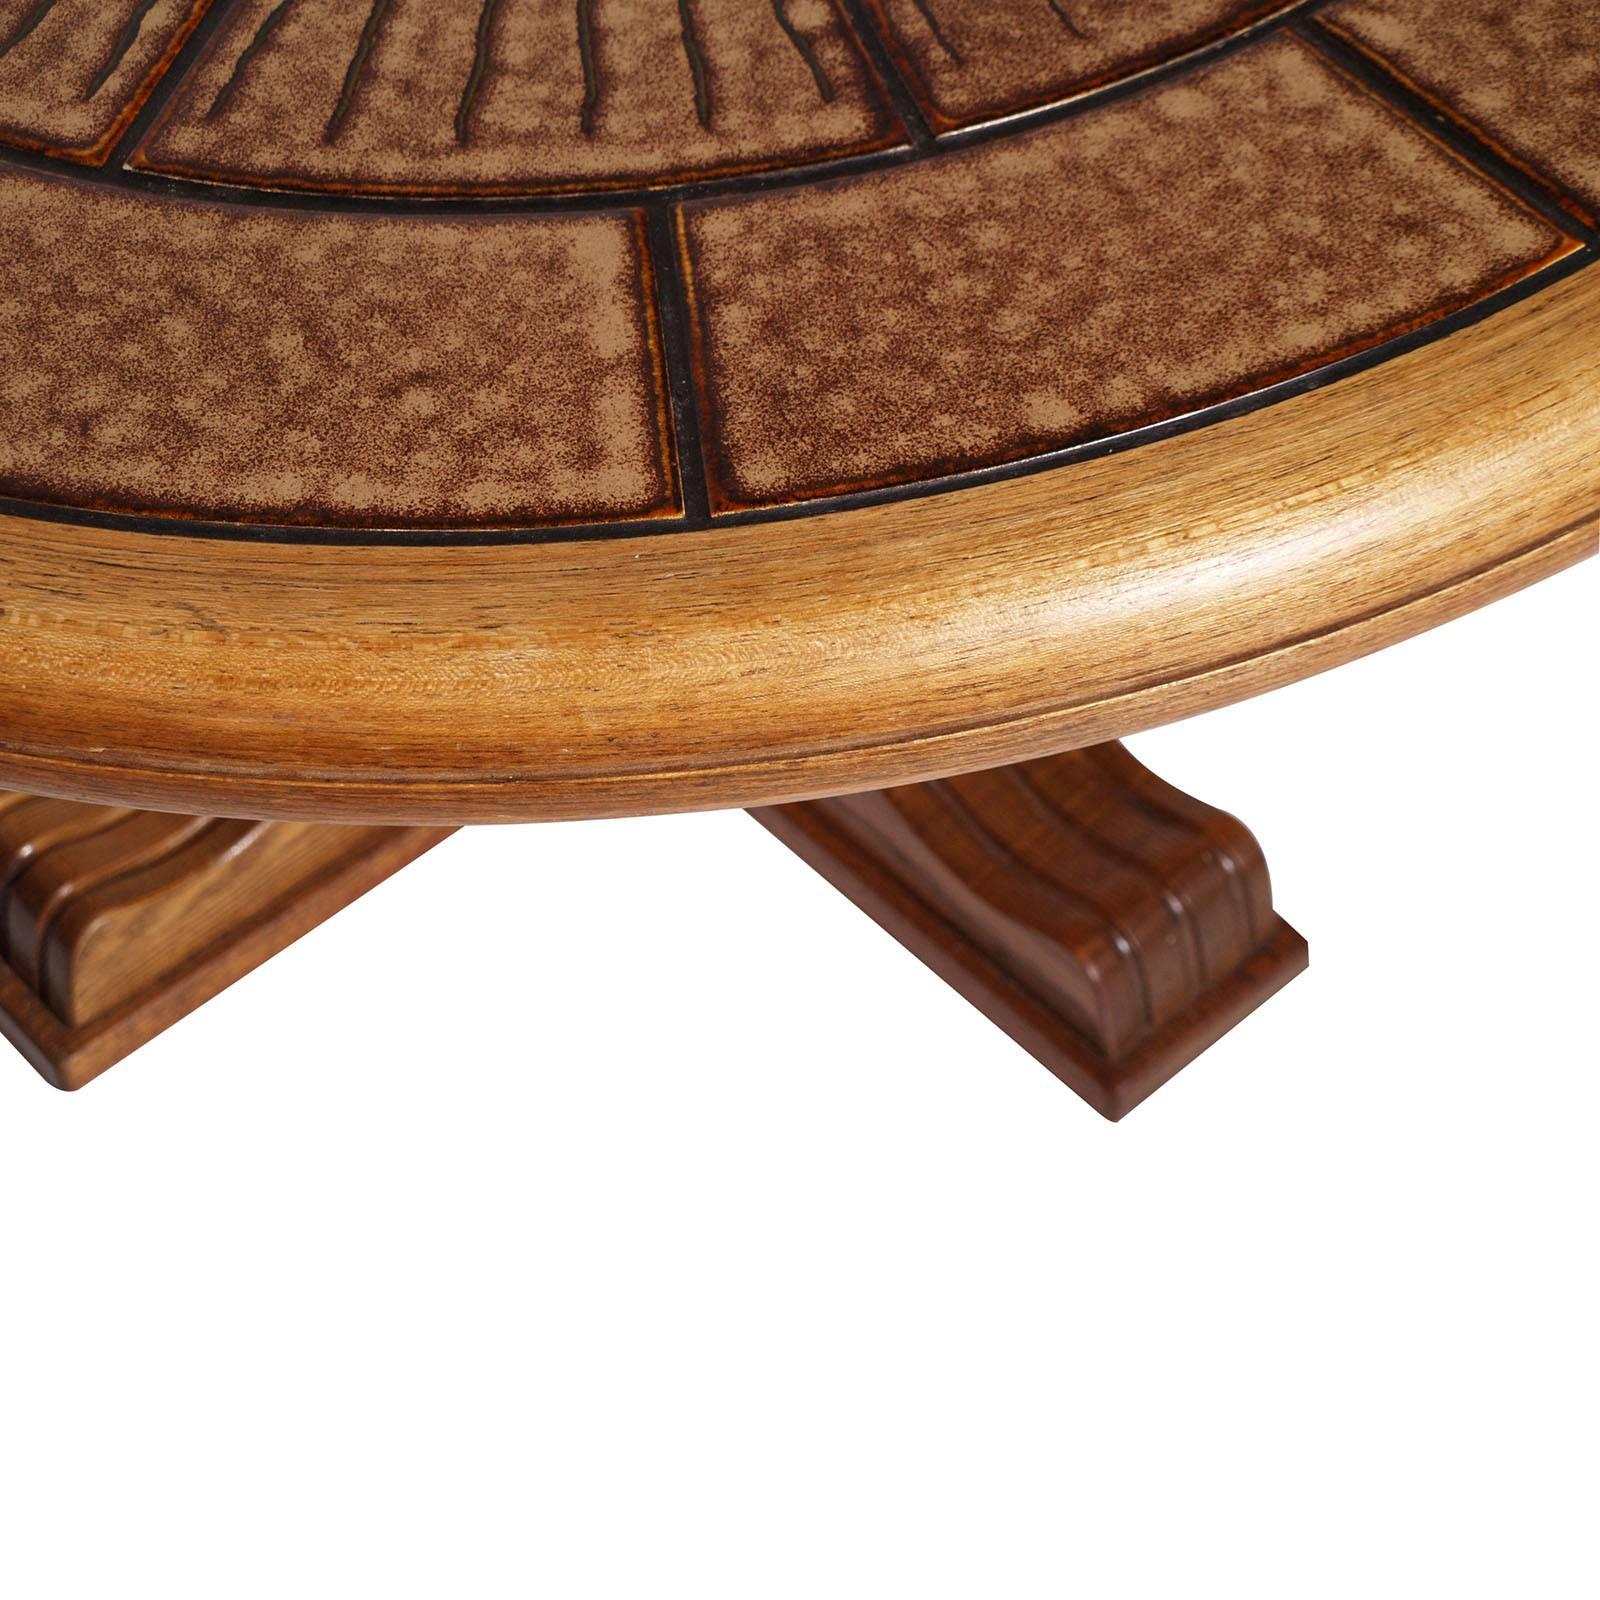 Country Tuscany Round Baroque Style Solid Walnut Coffee Centre Table with Top in Ceramic For Sale